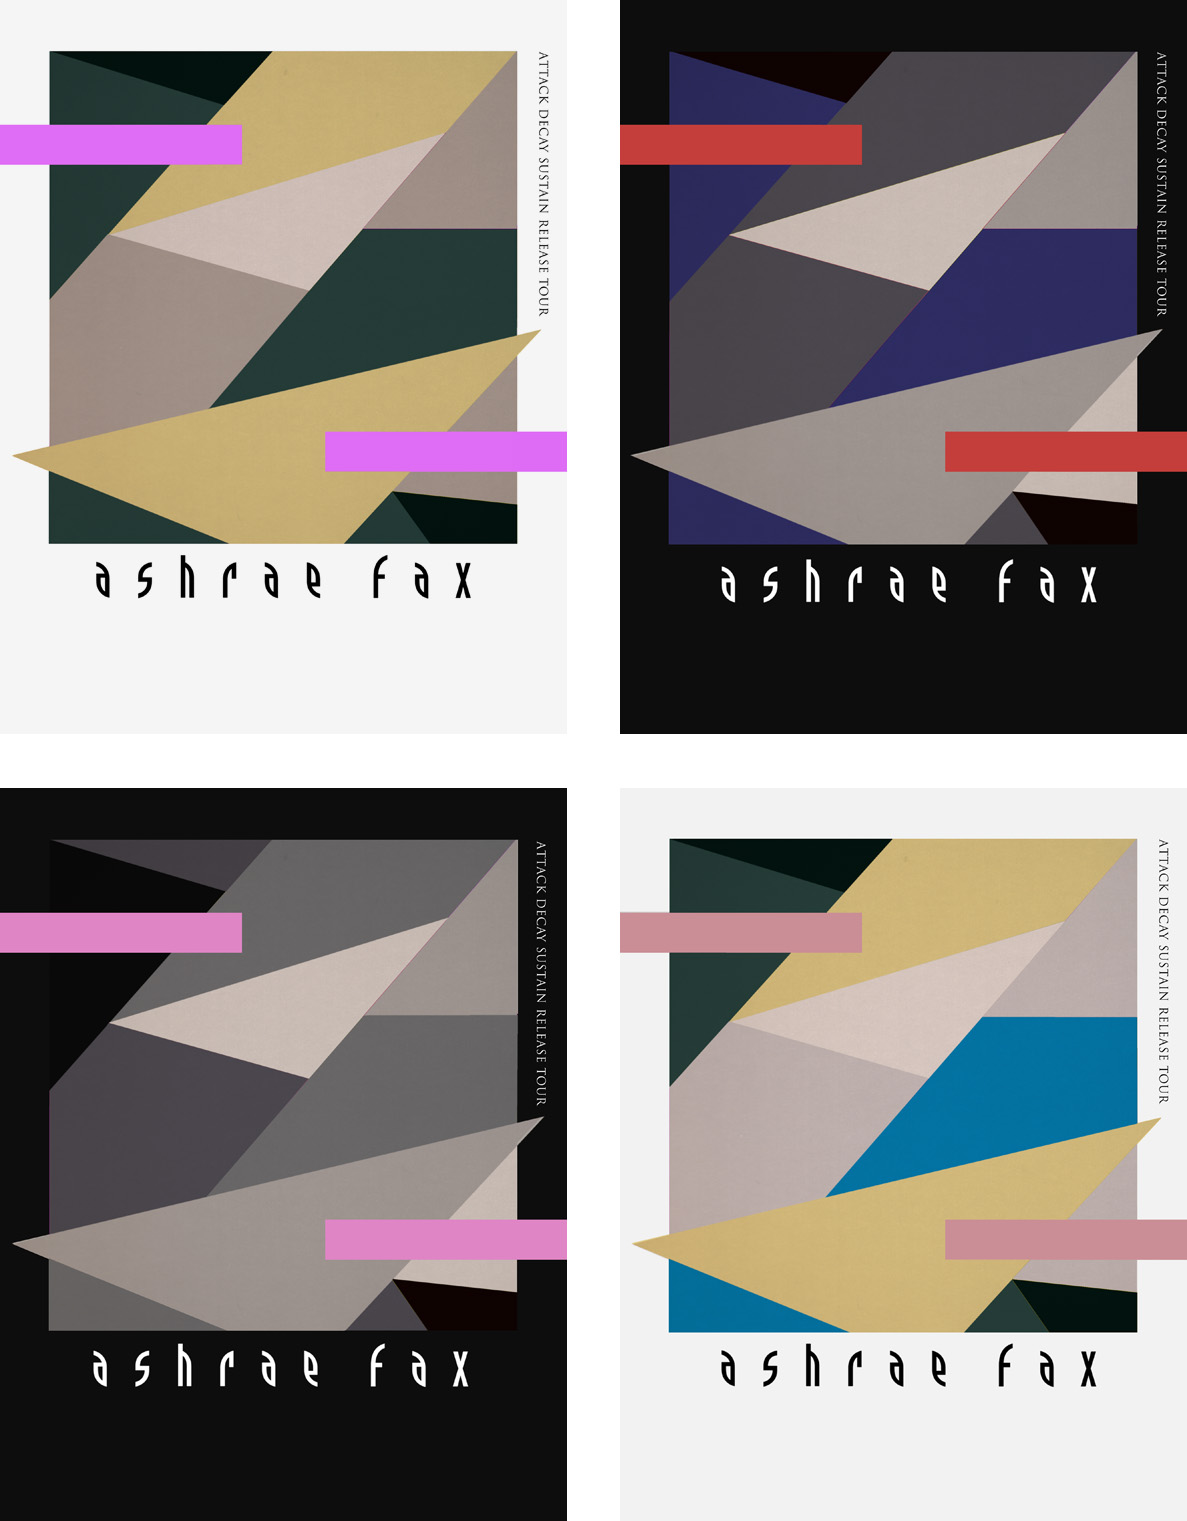 Ashrae Fax 'Attack Decay Sustain Release' Tour Posters Designed by Kristian Goddard